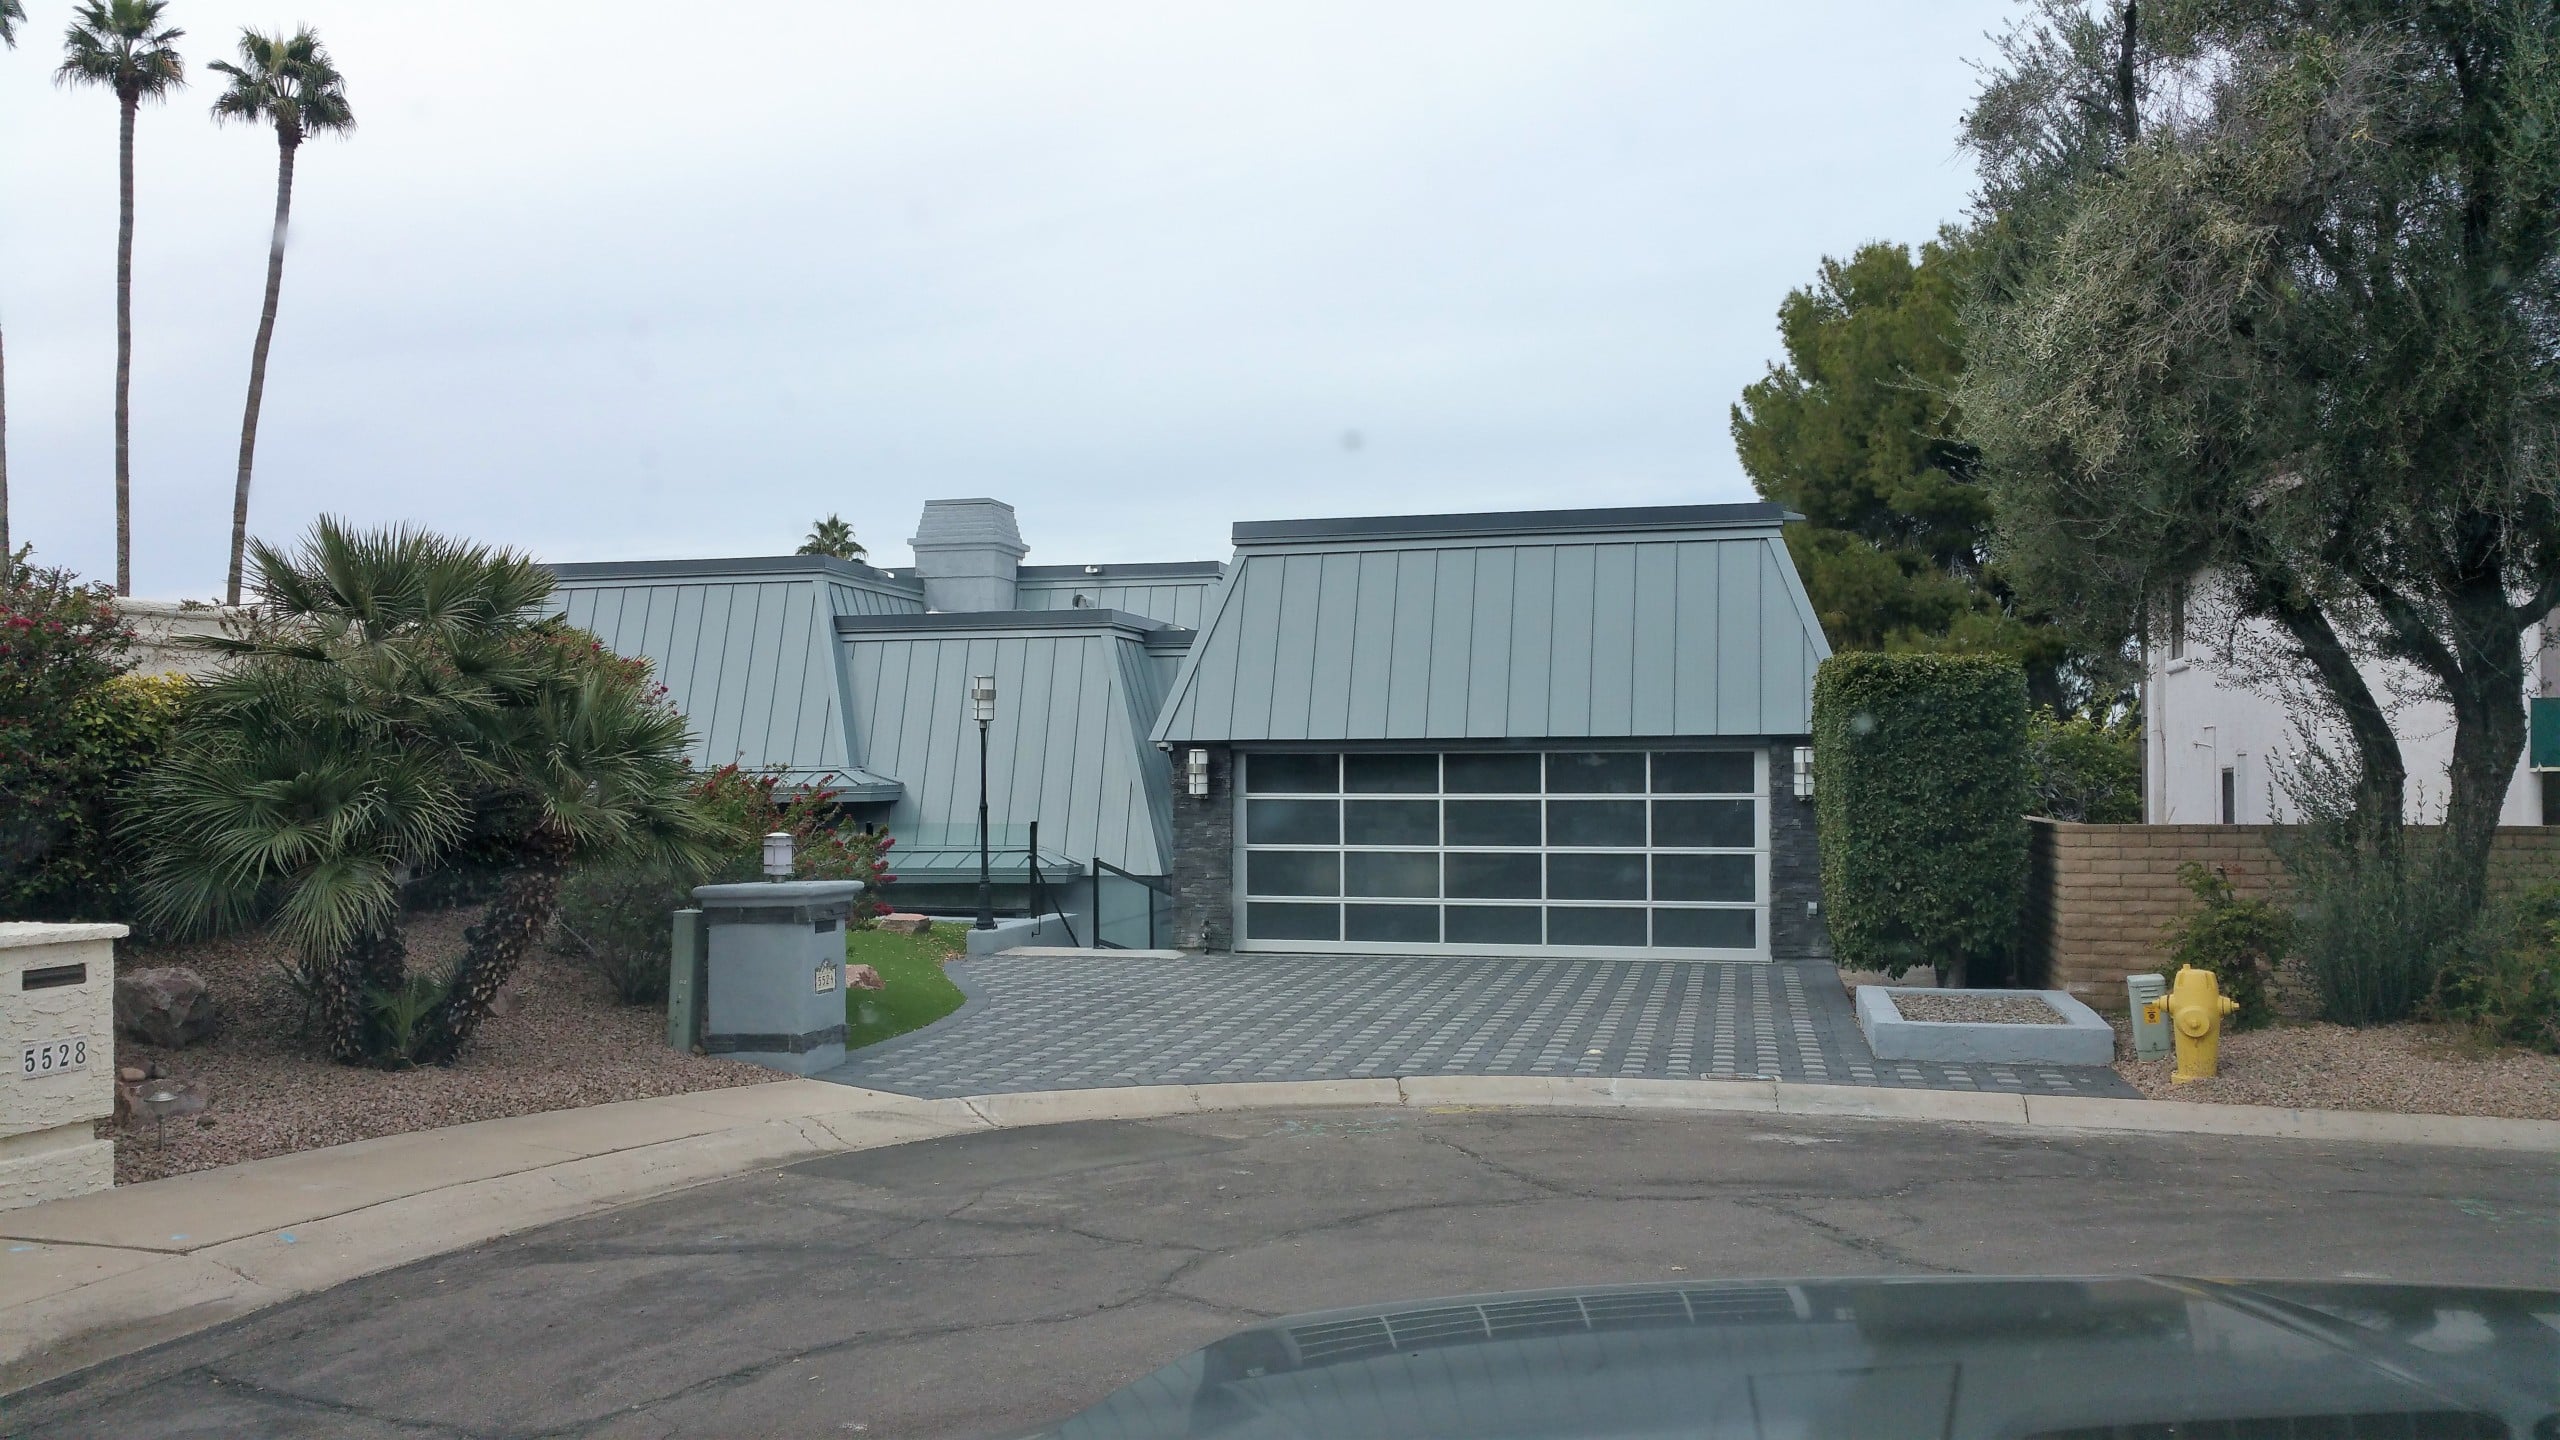 Standing Seam Metal Roof On A Commercial Property In Phoenix, AZ